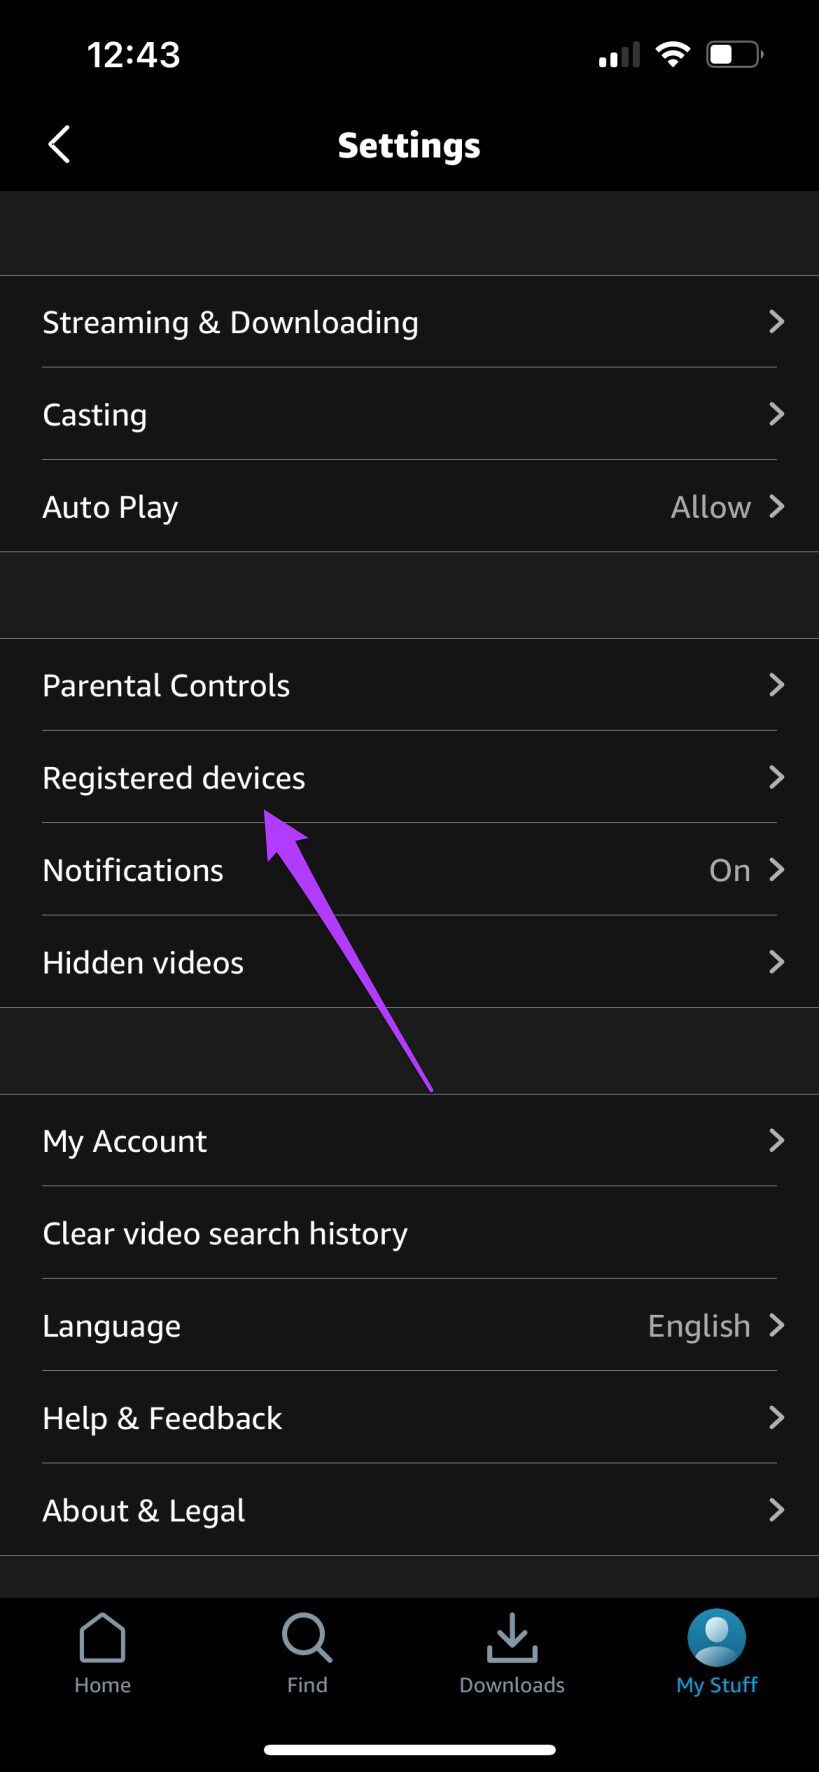 How to Remove Registered Devices From Amazon Prime Video - 48